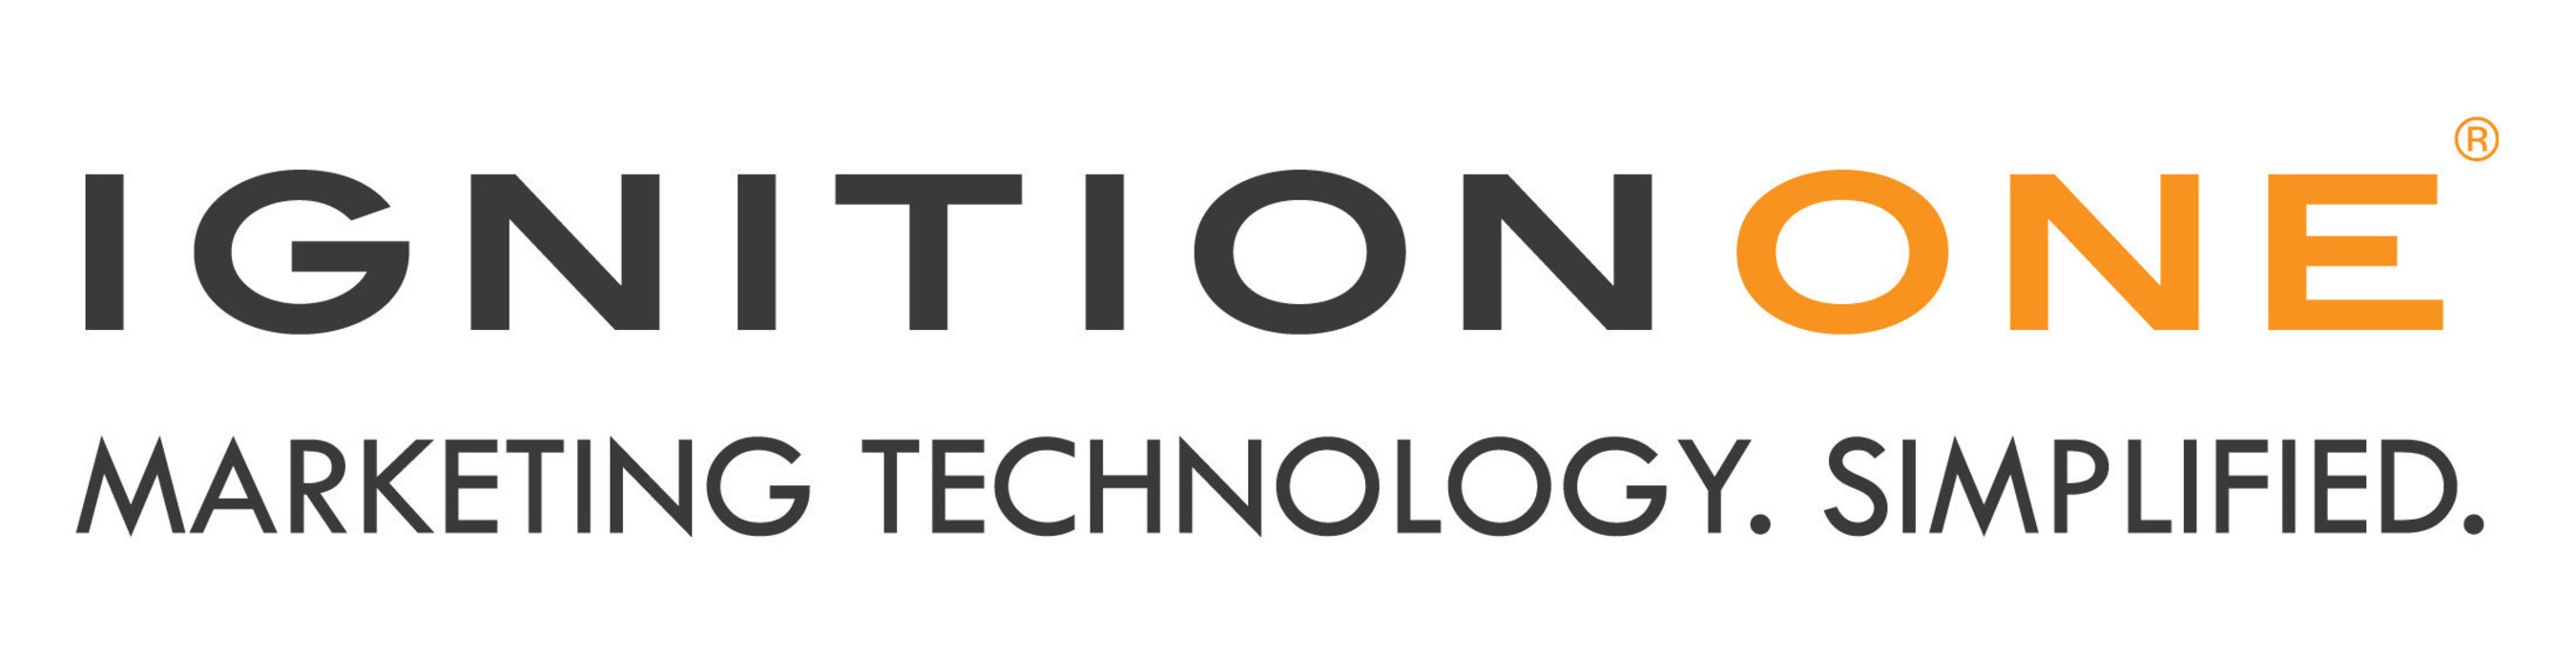 IgnitionOne Strengthens Mobile Offering with Acquisition of Leading Mobile Marketing Technology, Human Demand (PRNewsFoto/IgnitionOne)